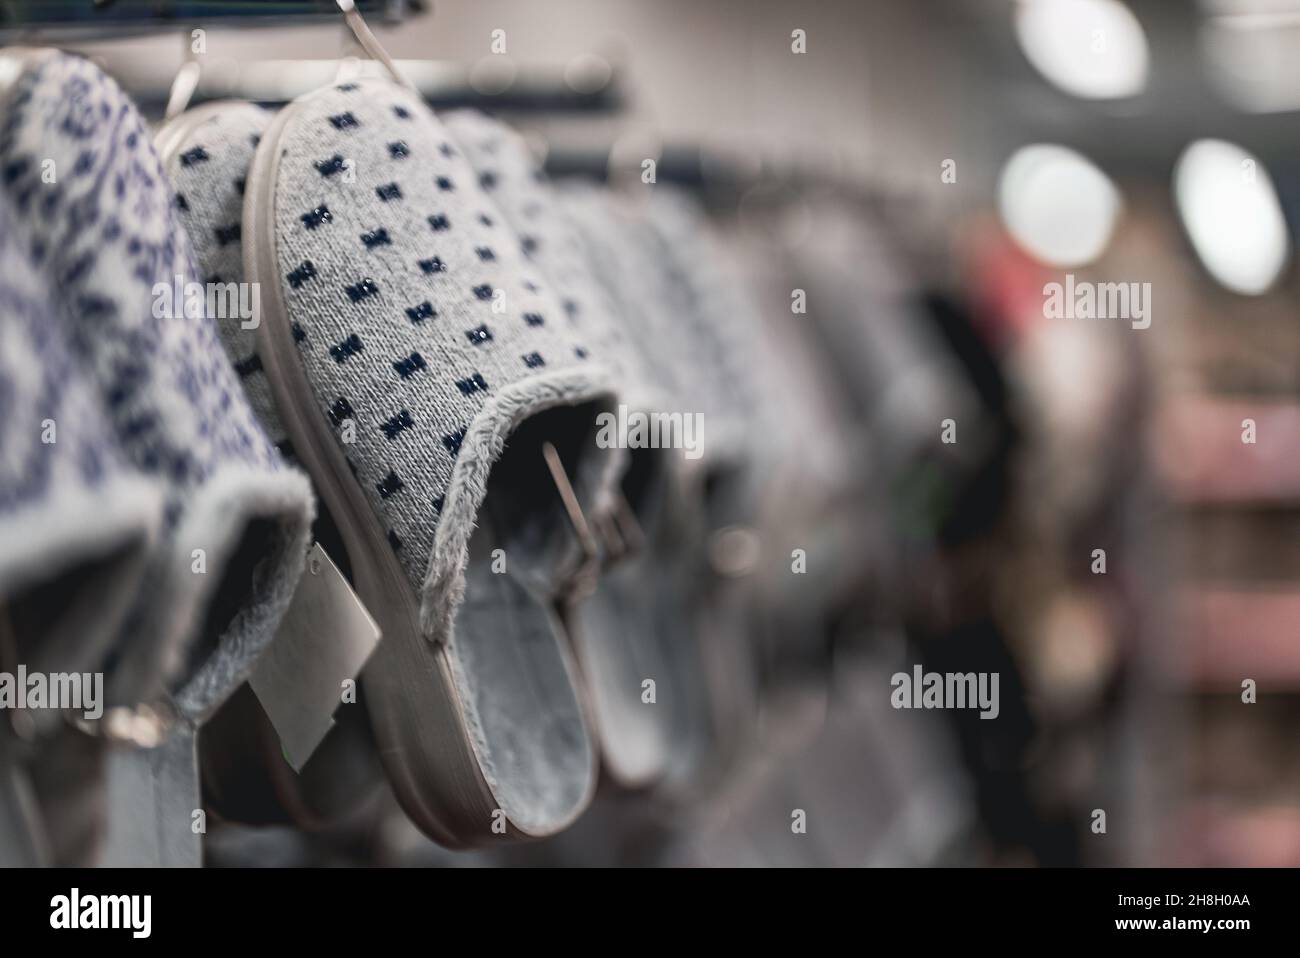 Home slippers in a clothing store. Stock Photo